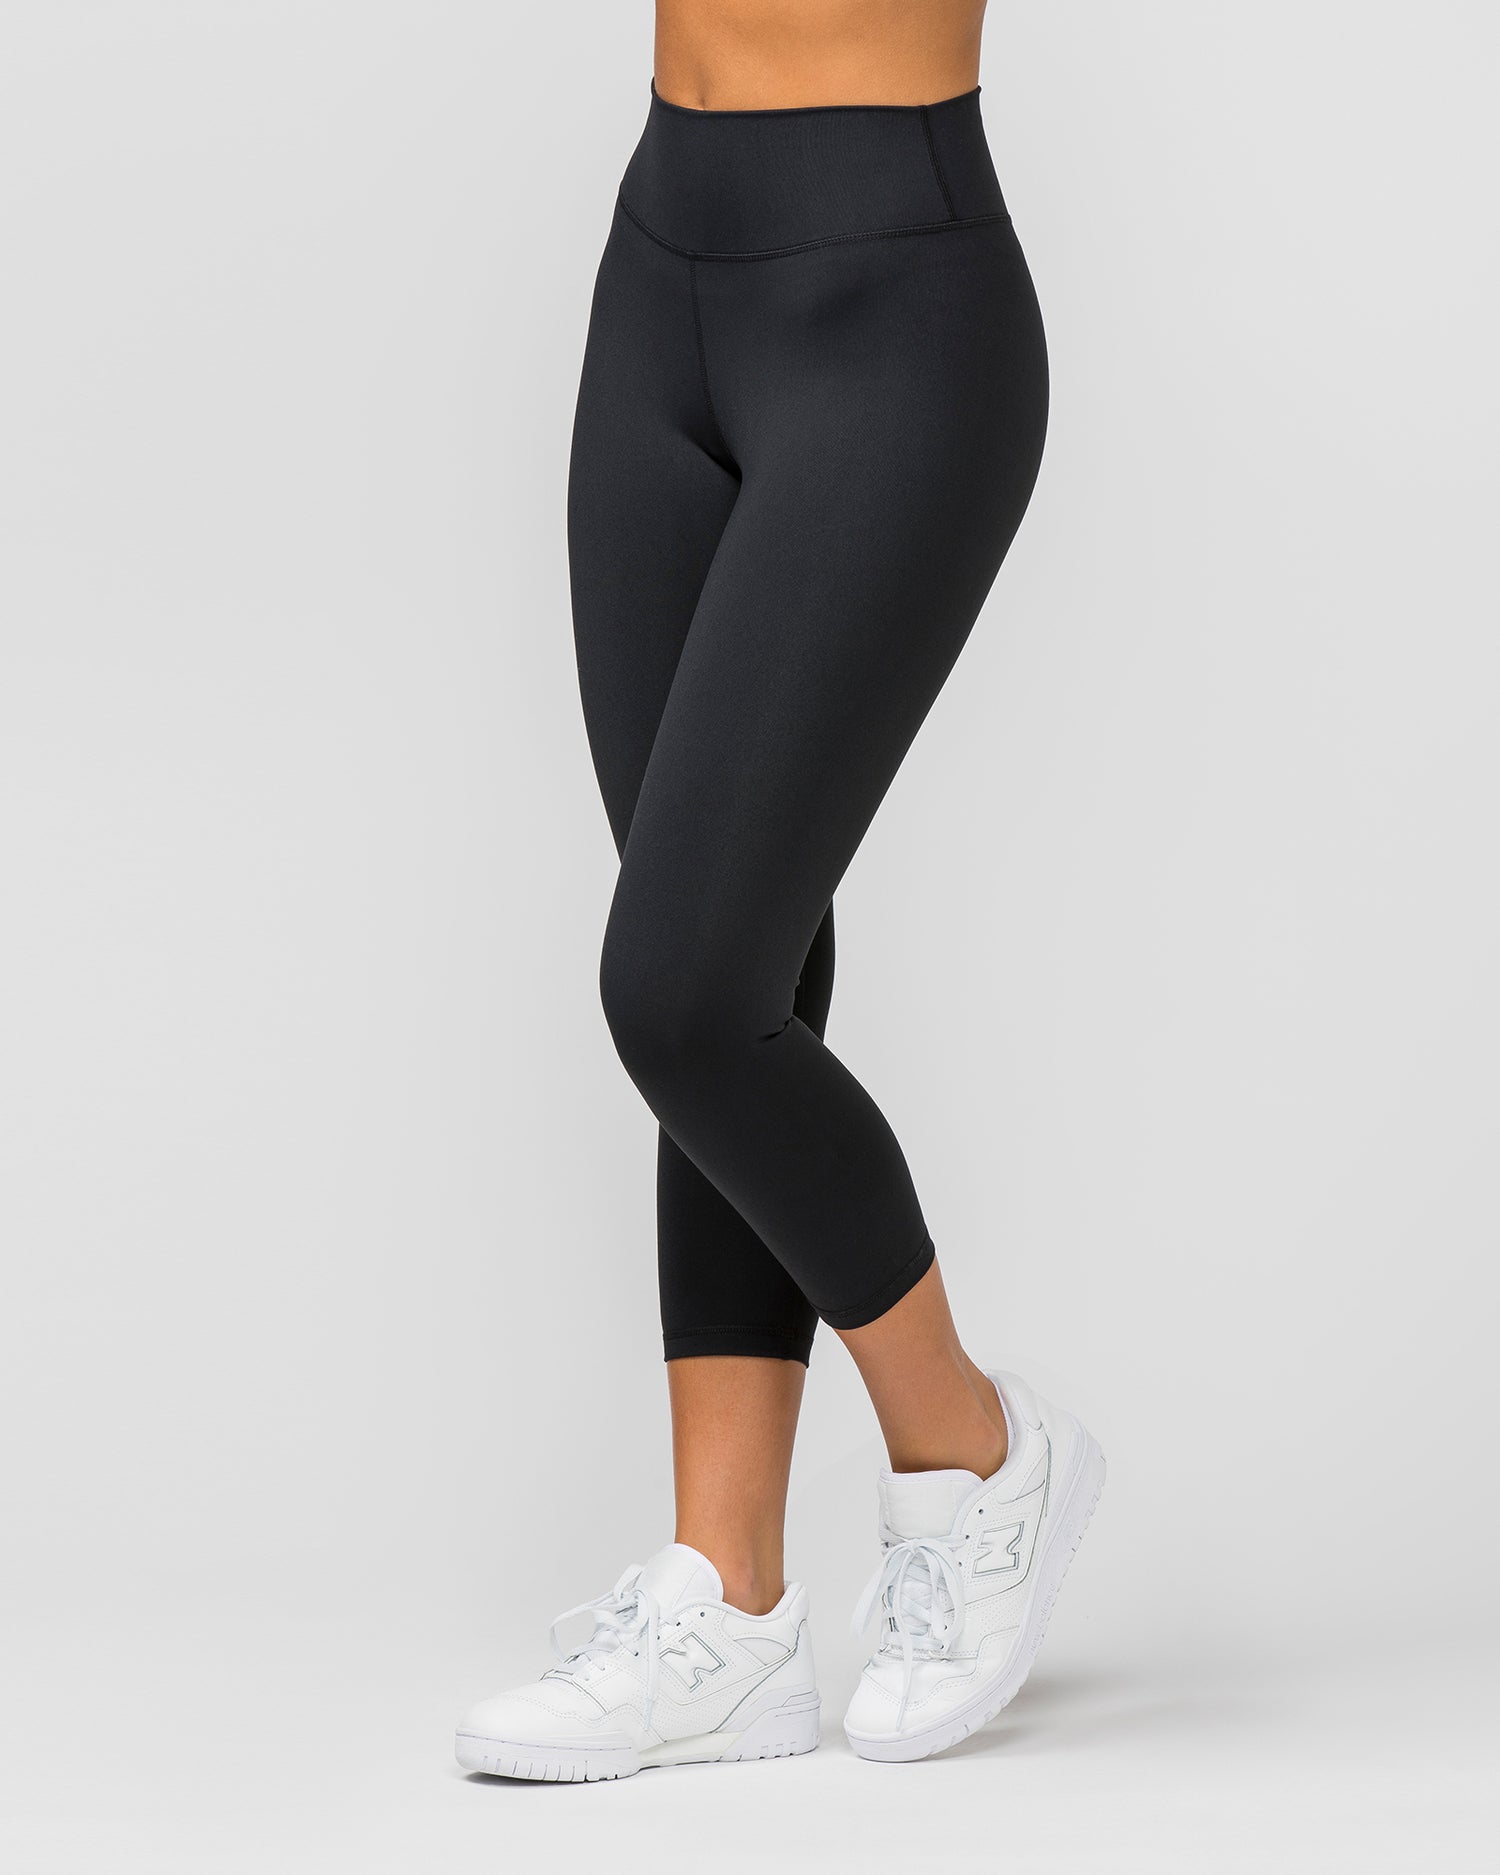 Game Changer Scrunch 7/8 Leggings - Quiet Grey Marl - Muscle Nation